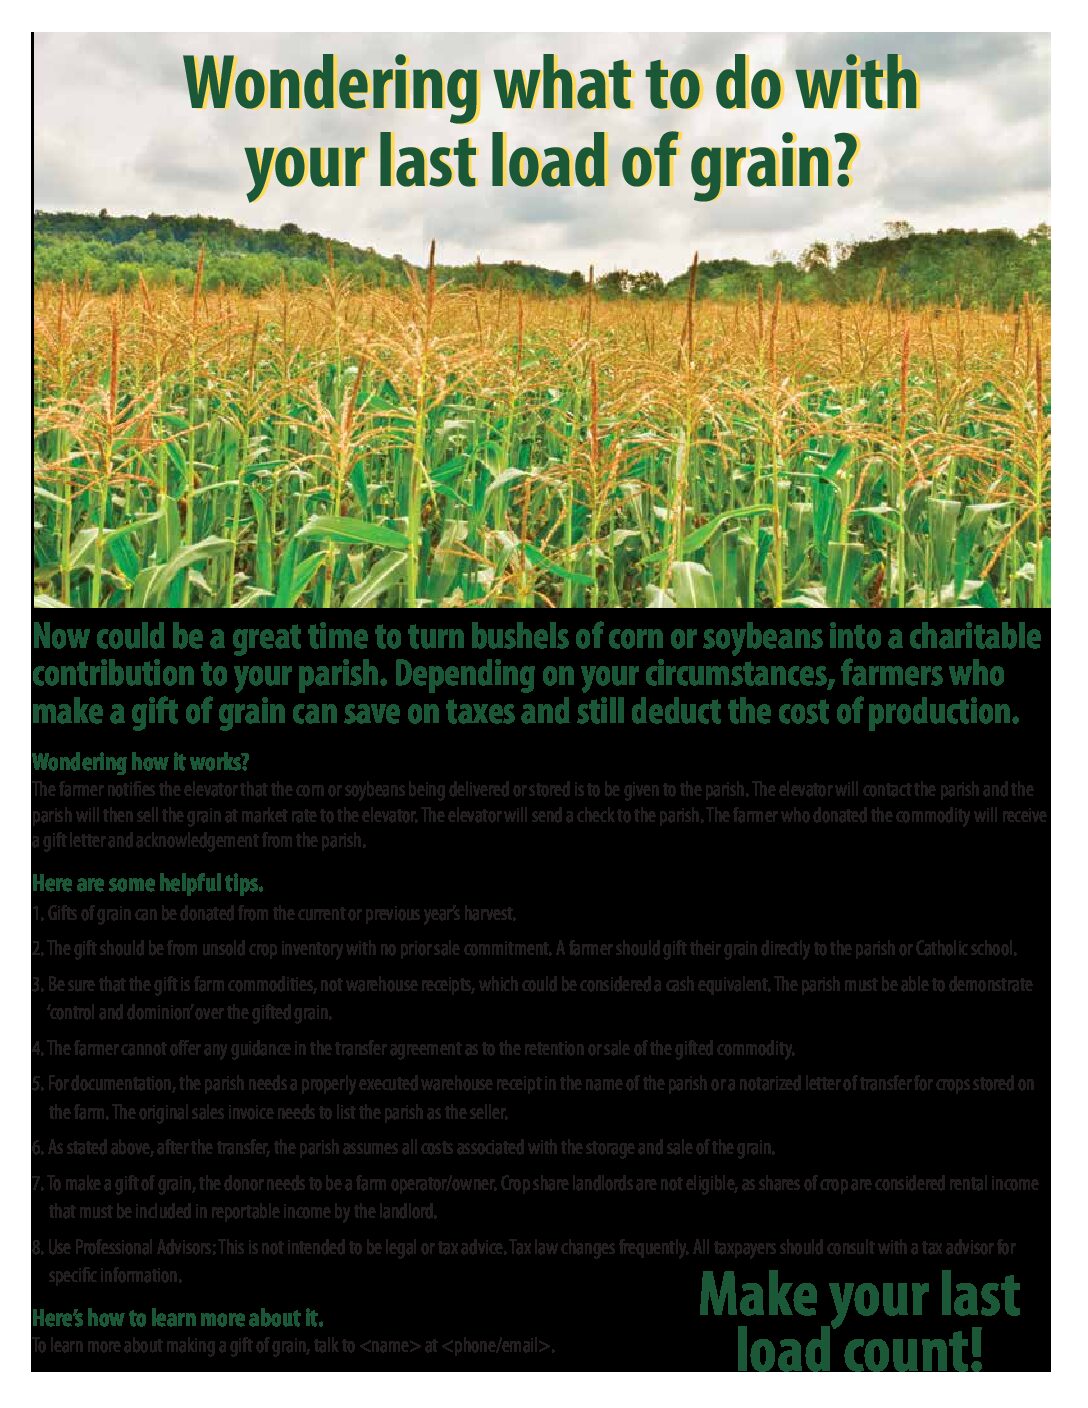 Wondering What to Do With Your Last Load of Grain?